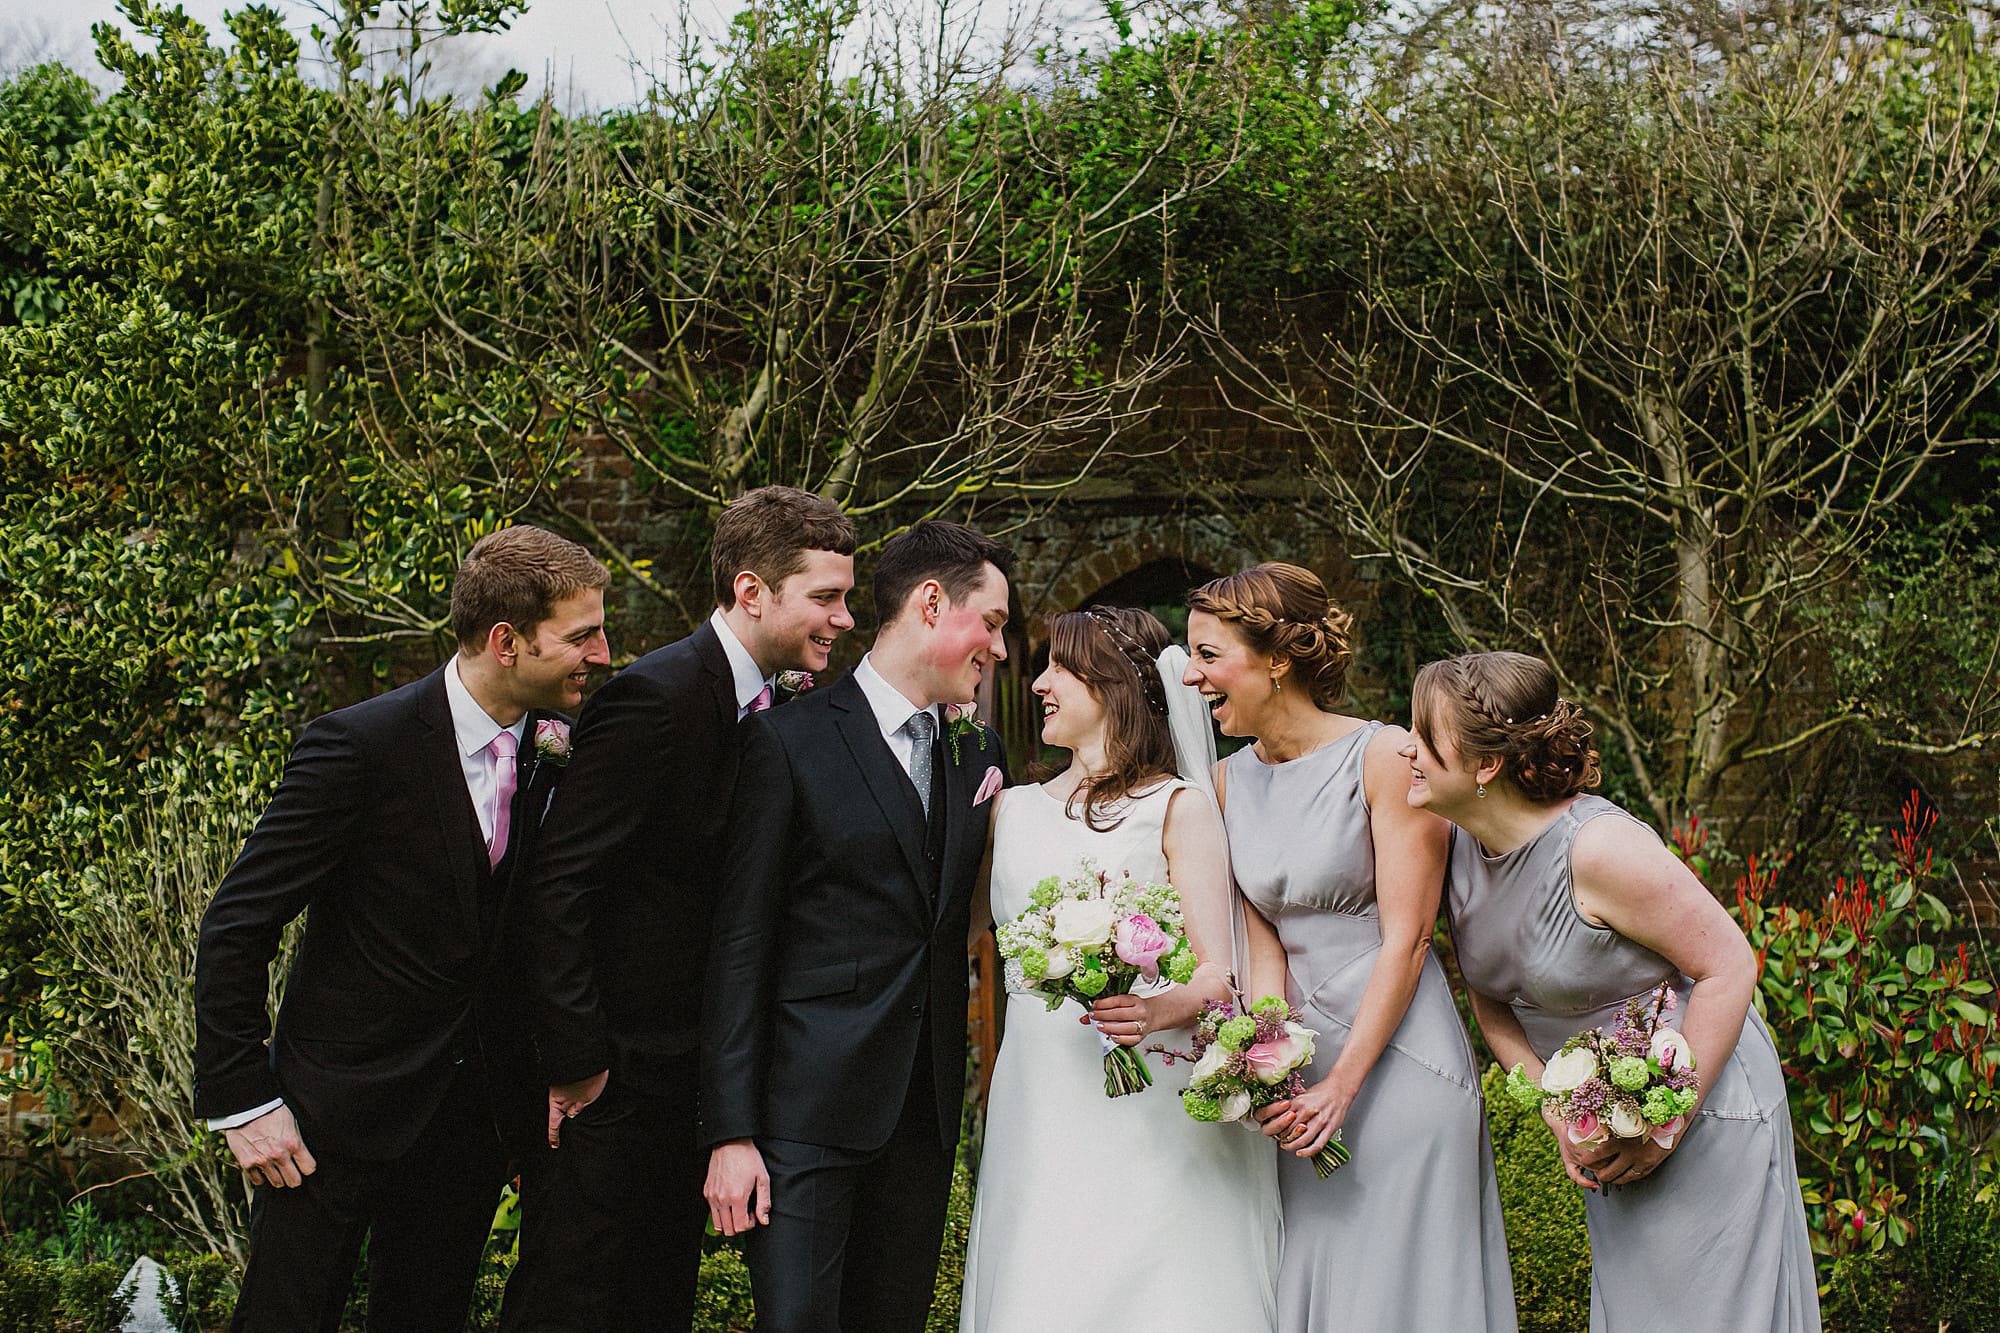 bride and groom with bridesmaids and groomsmen